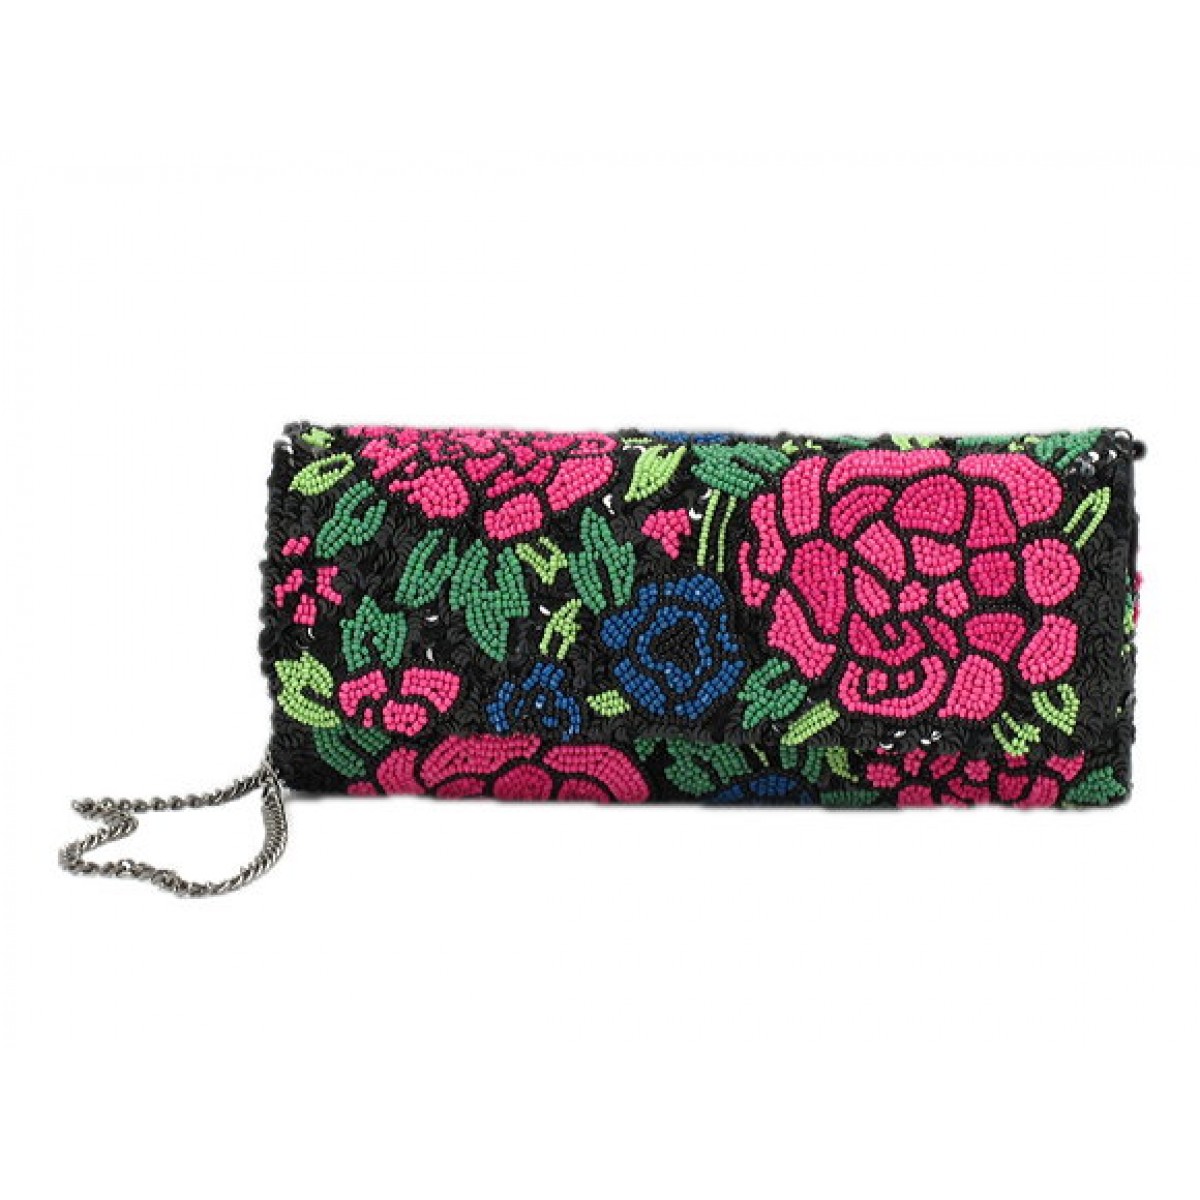 Beaded Cylindrical Clutch Floral Print